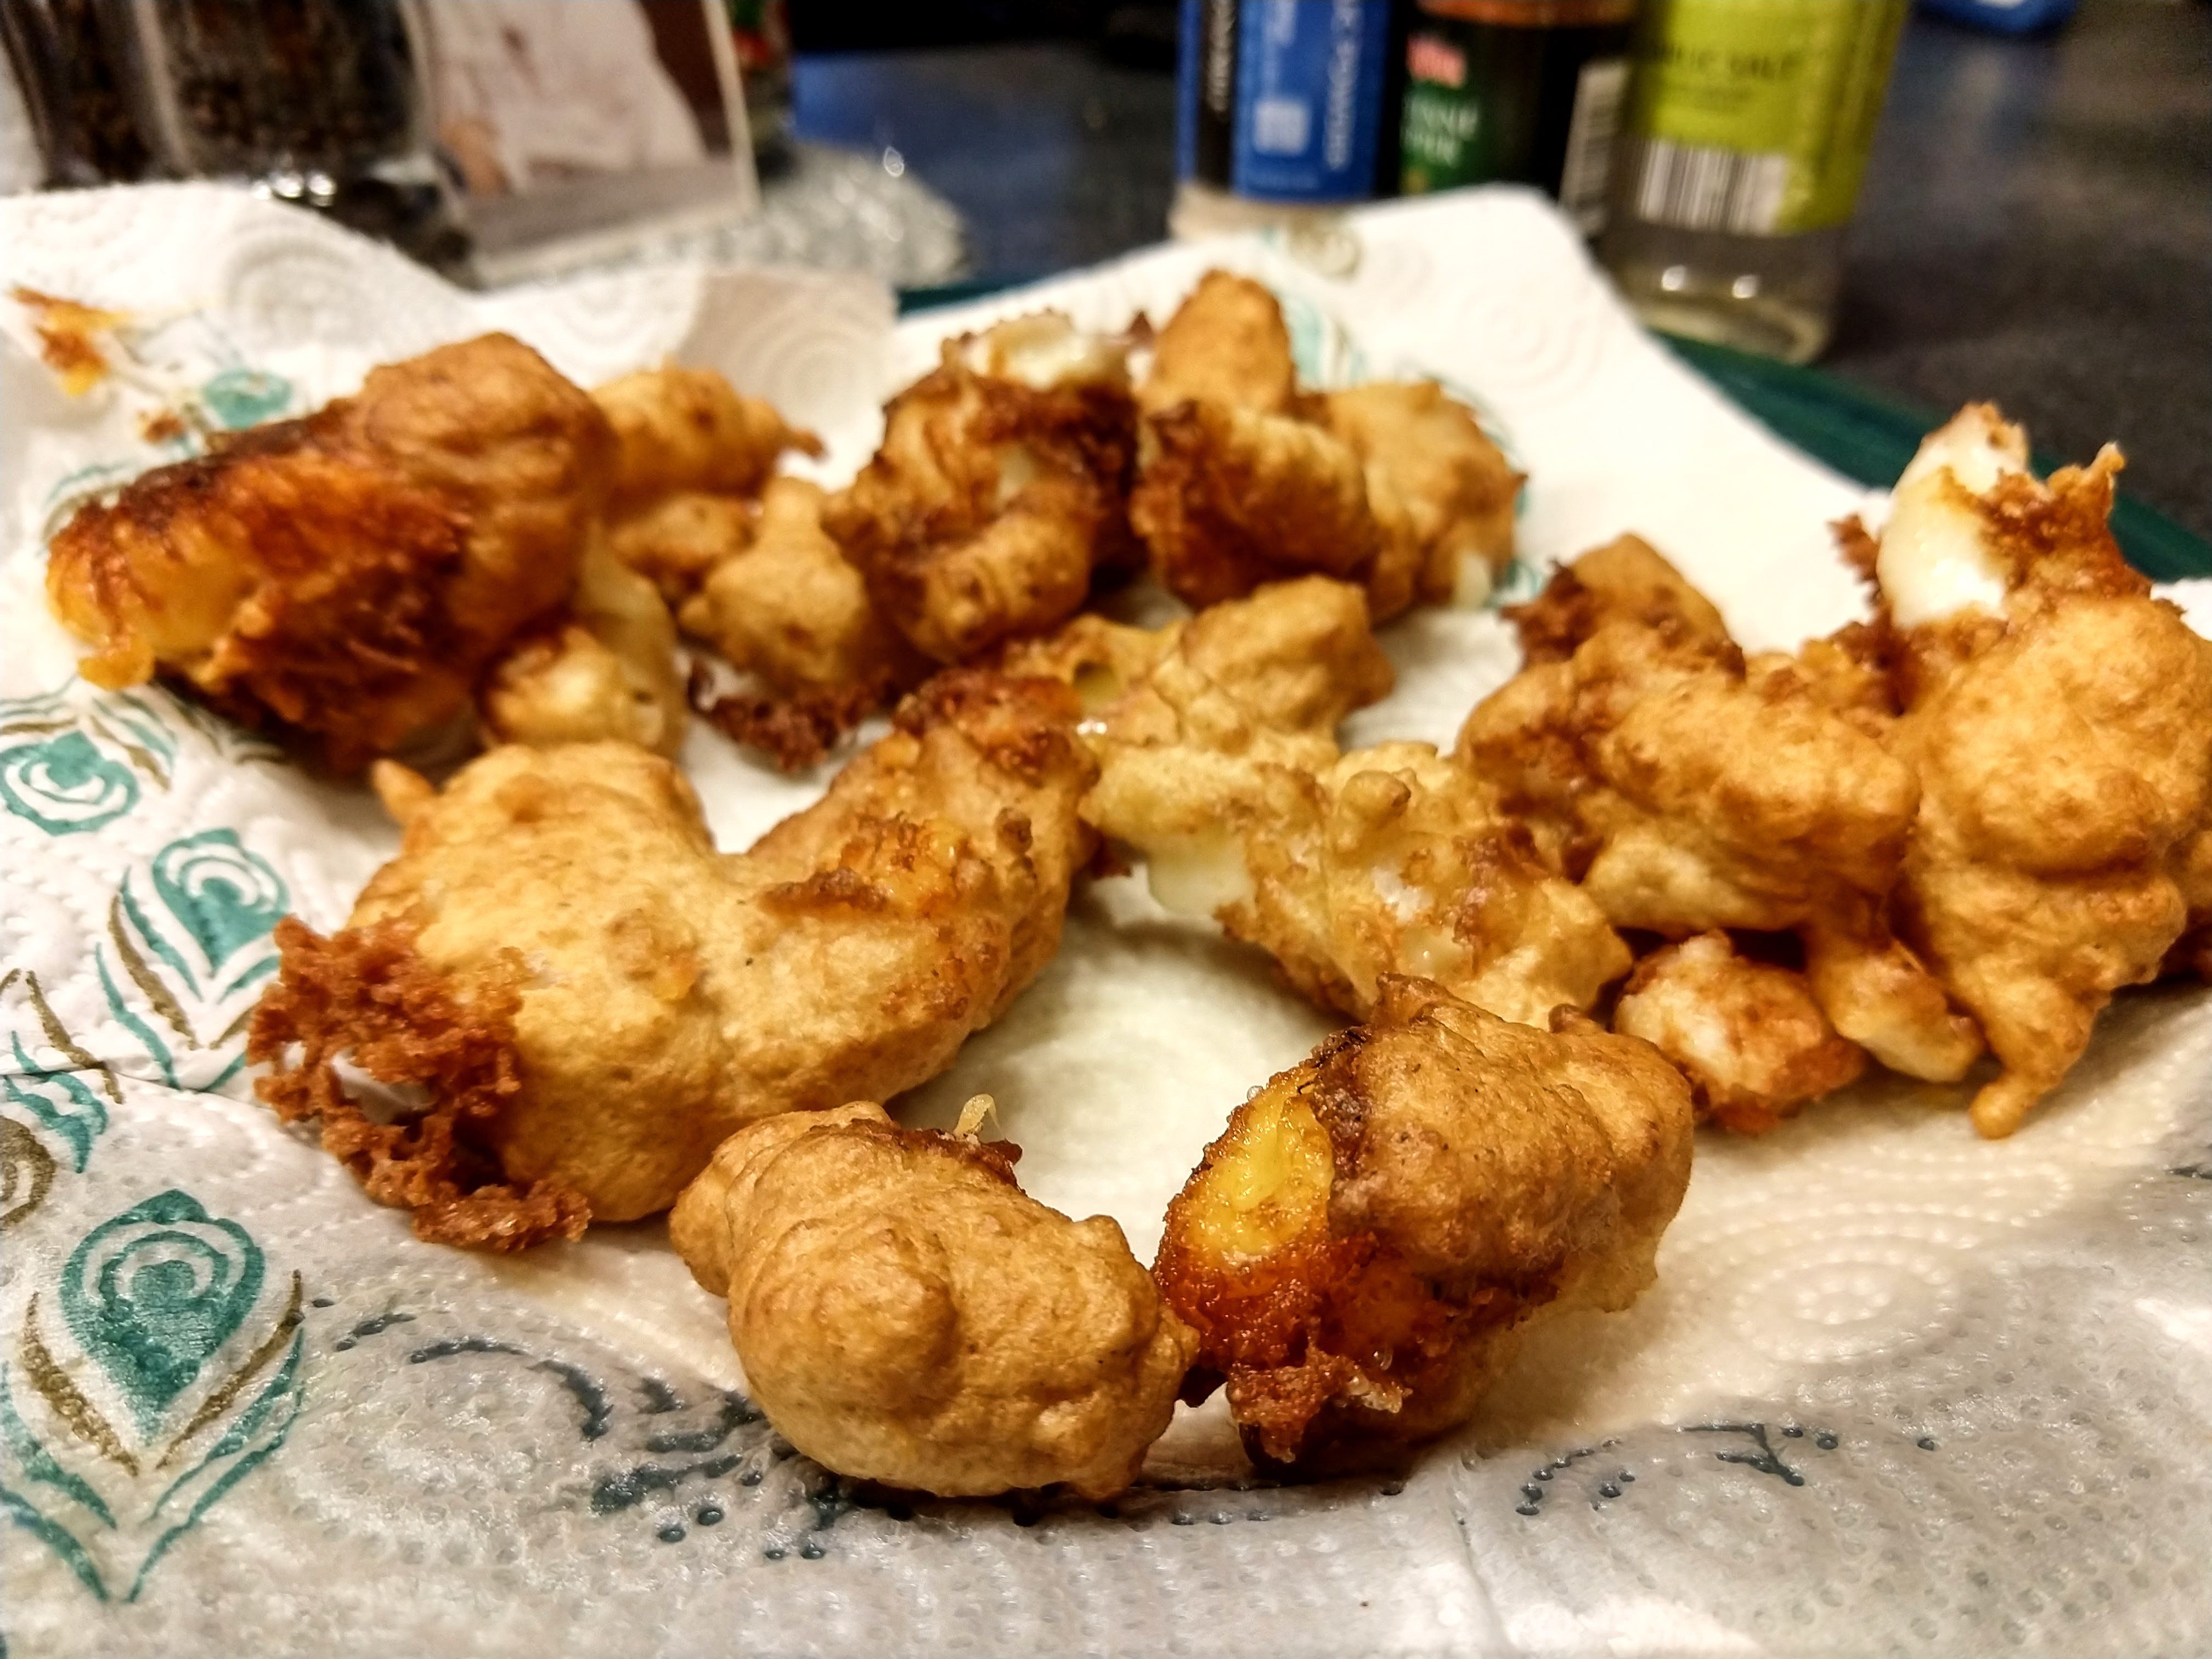 Fried homemade cheese curds